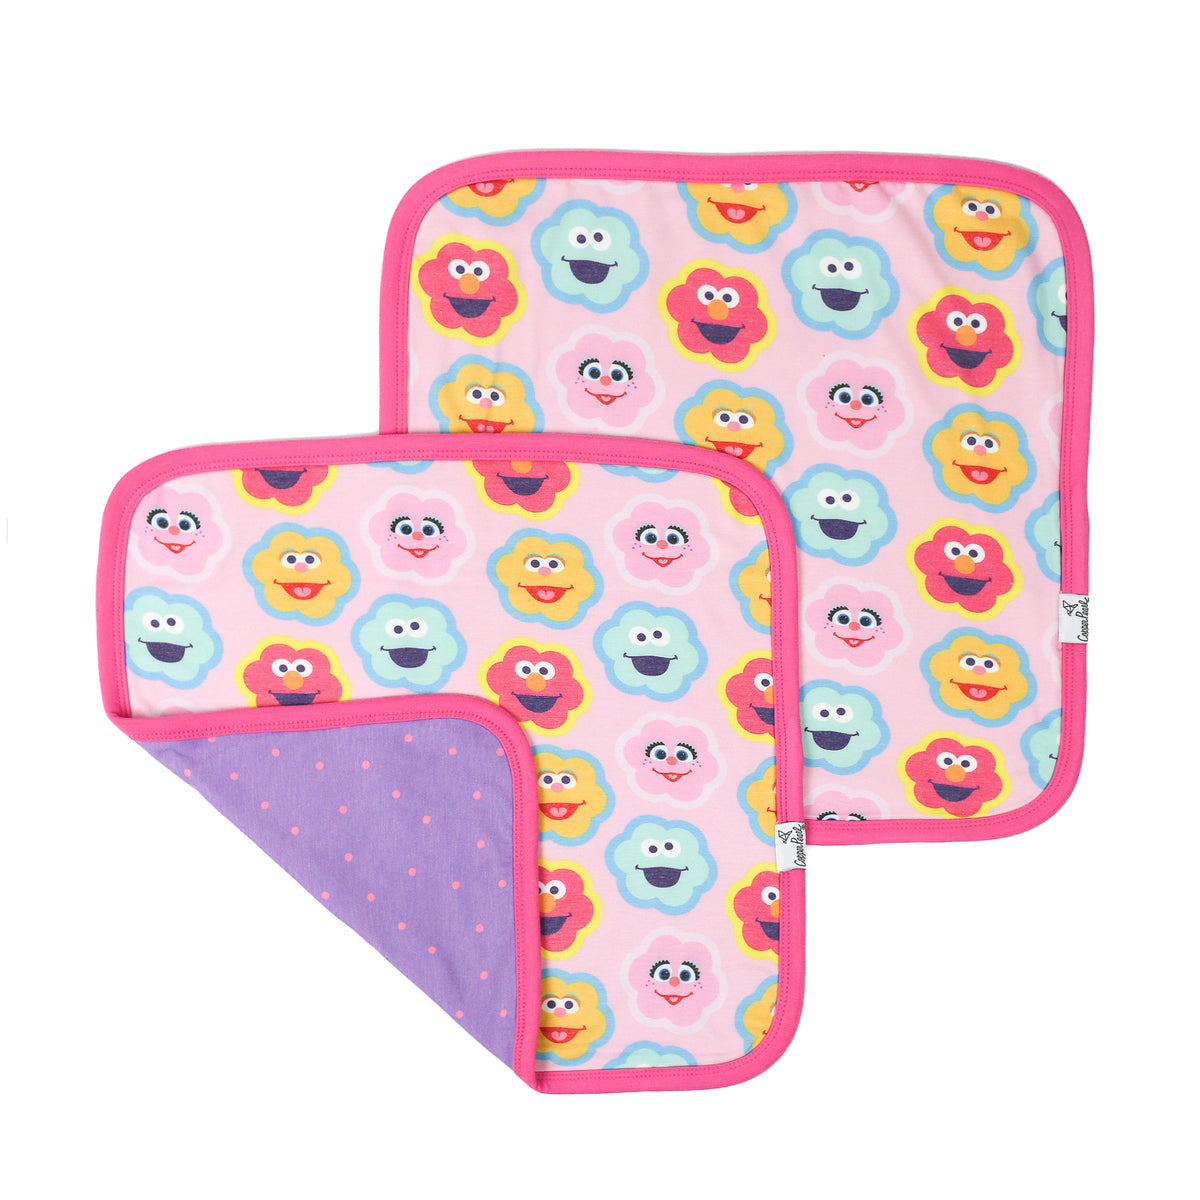 Three-Layer Security Blanket Set - Abby and Pals